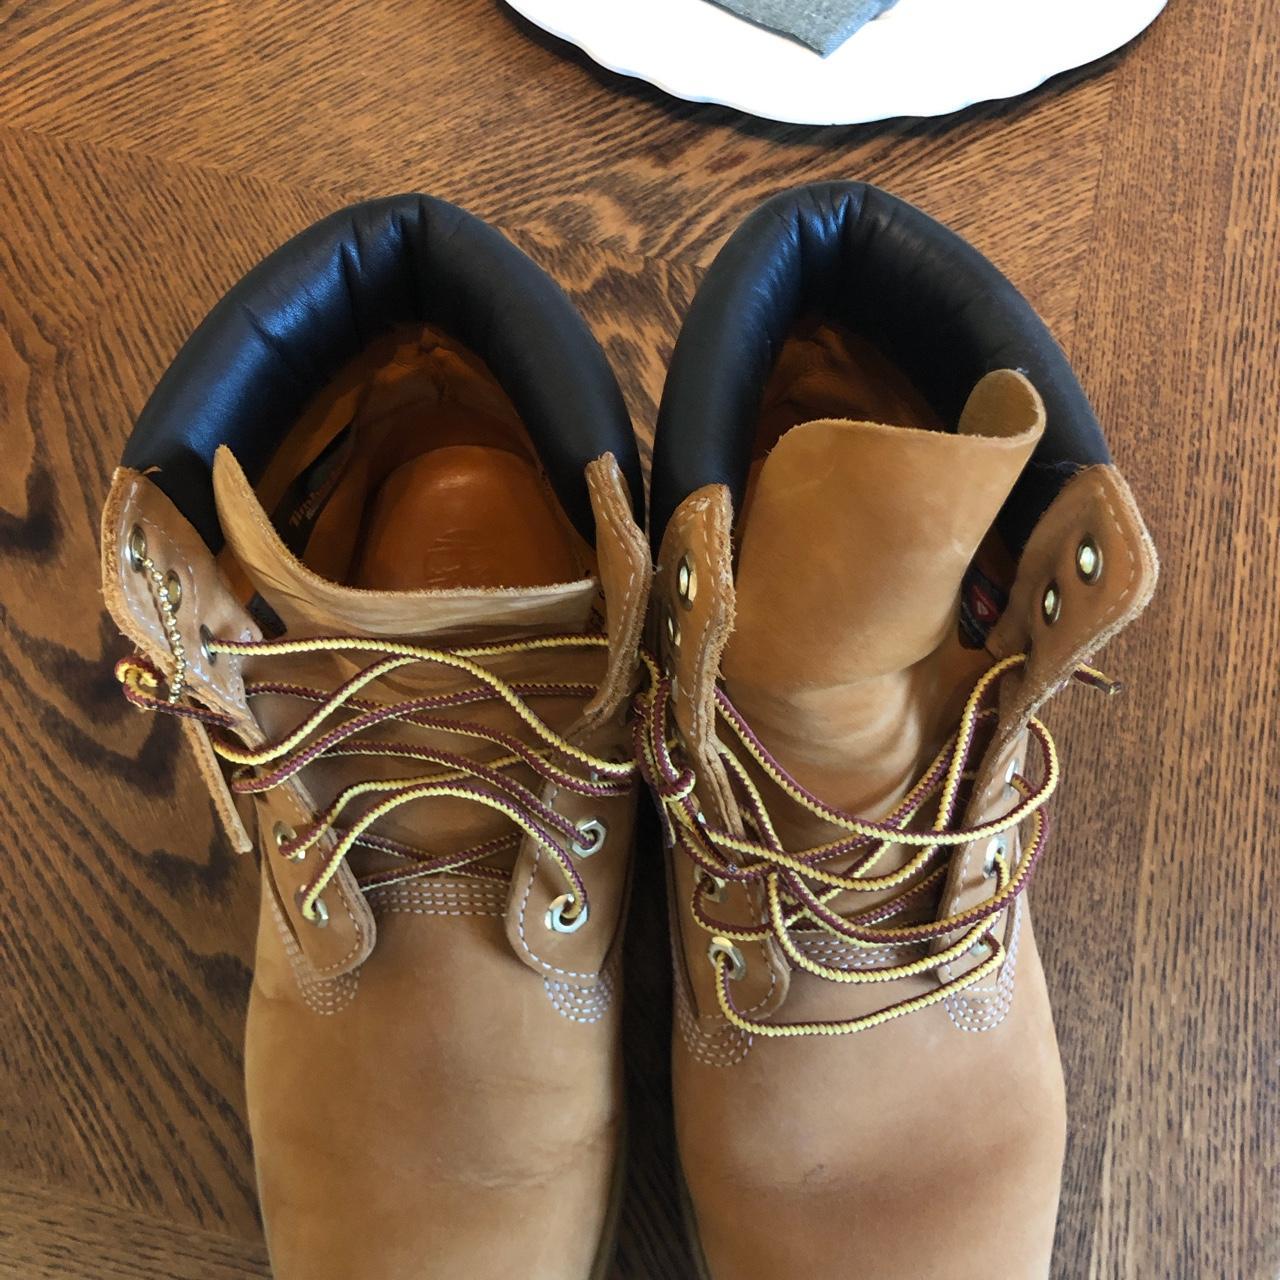 Timberland Men's Tan and Black Boots (4)